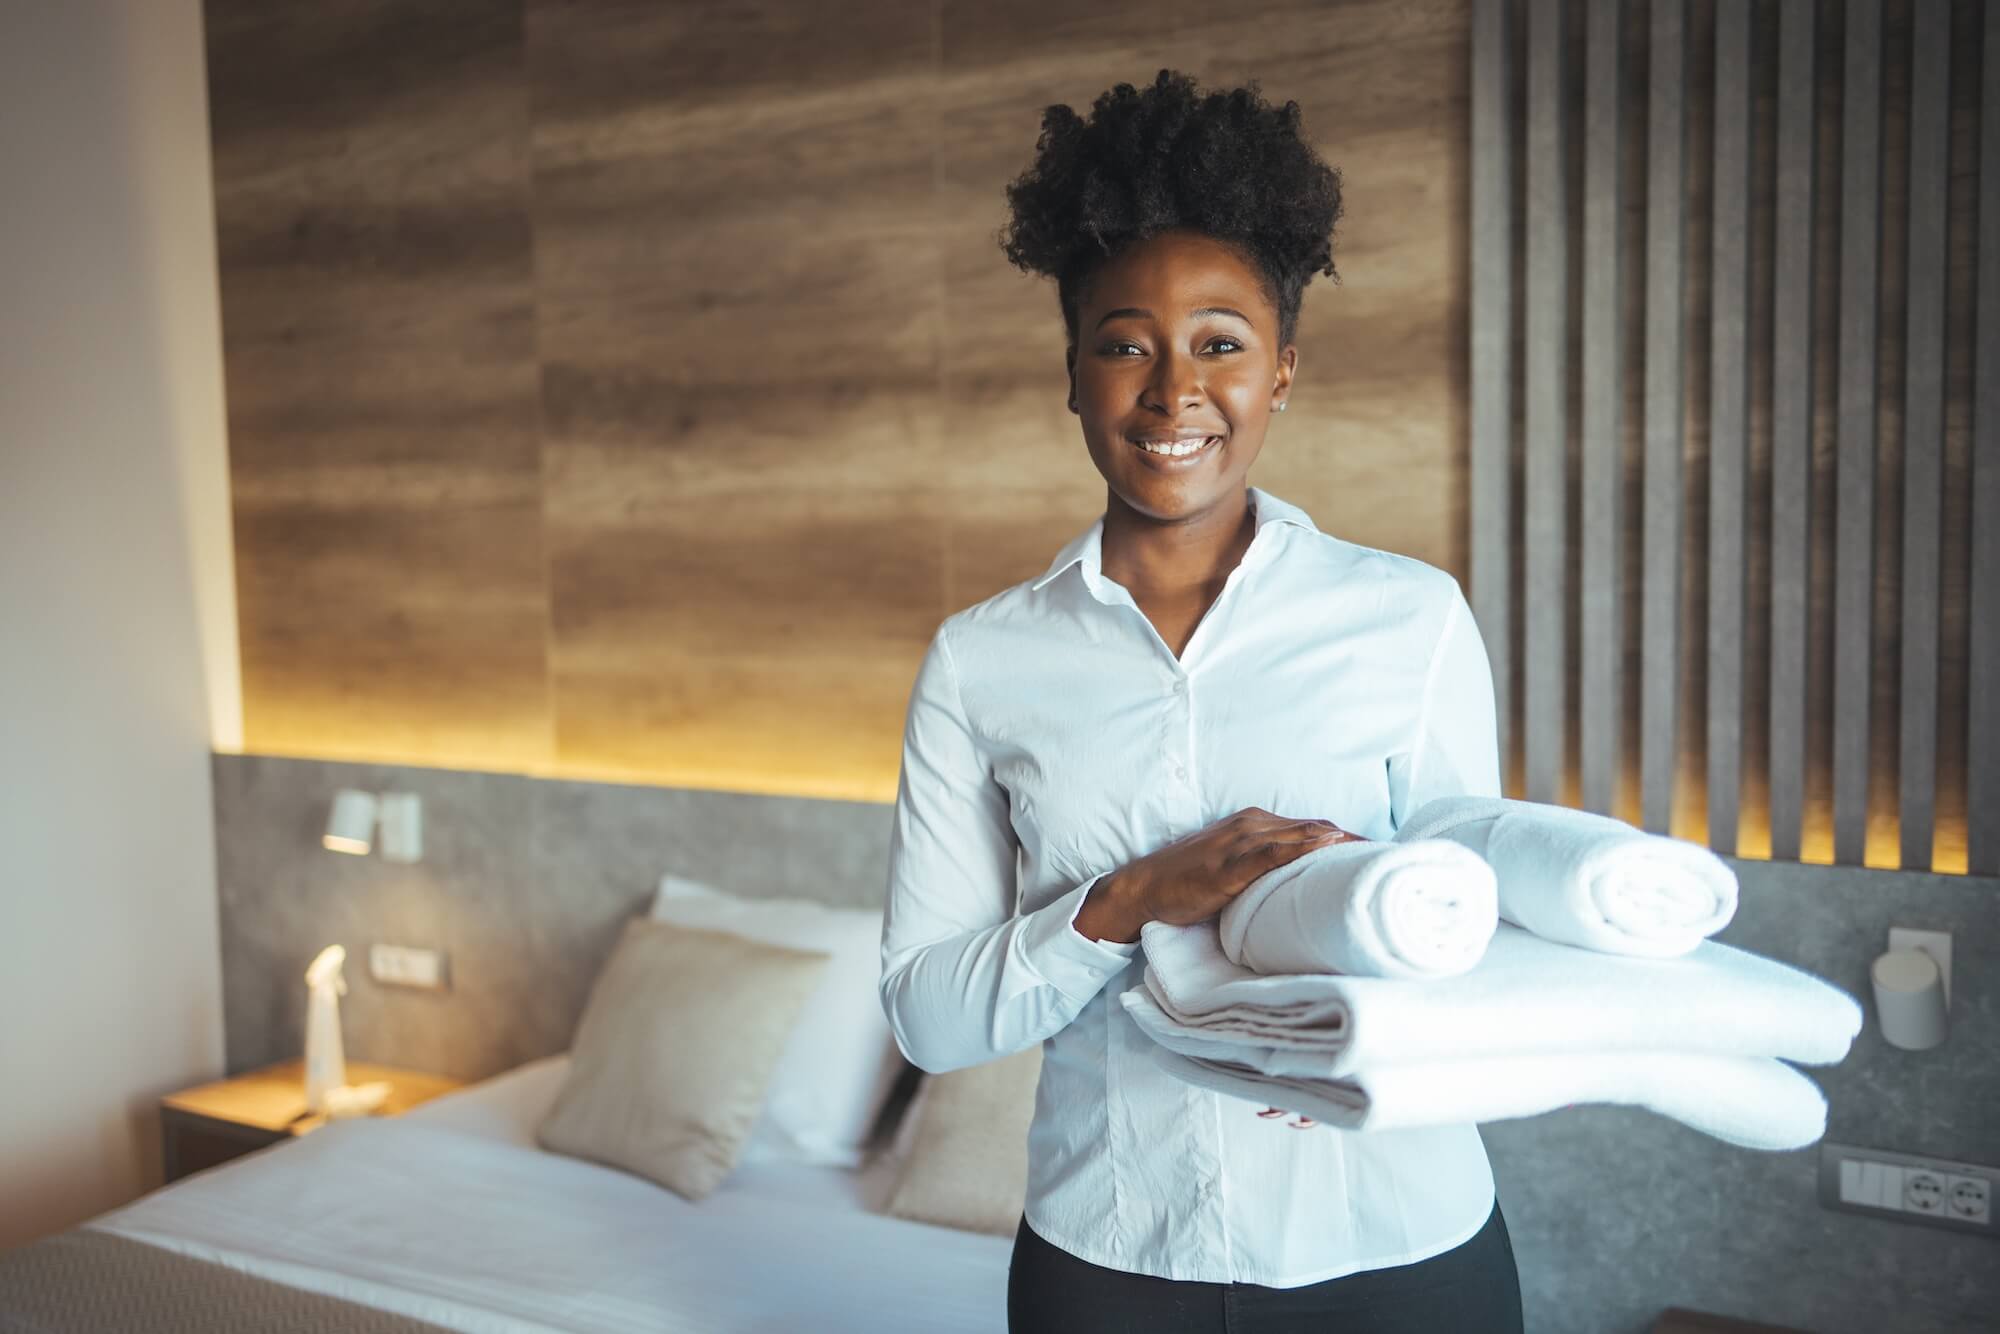 Sandy Springs GA Housekeeping services, hire a housekeeper in Sandy Springs GA